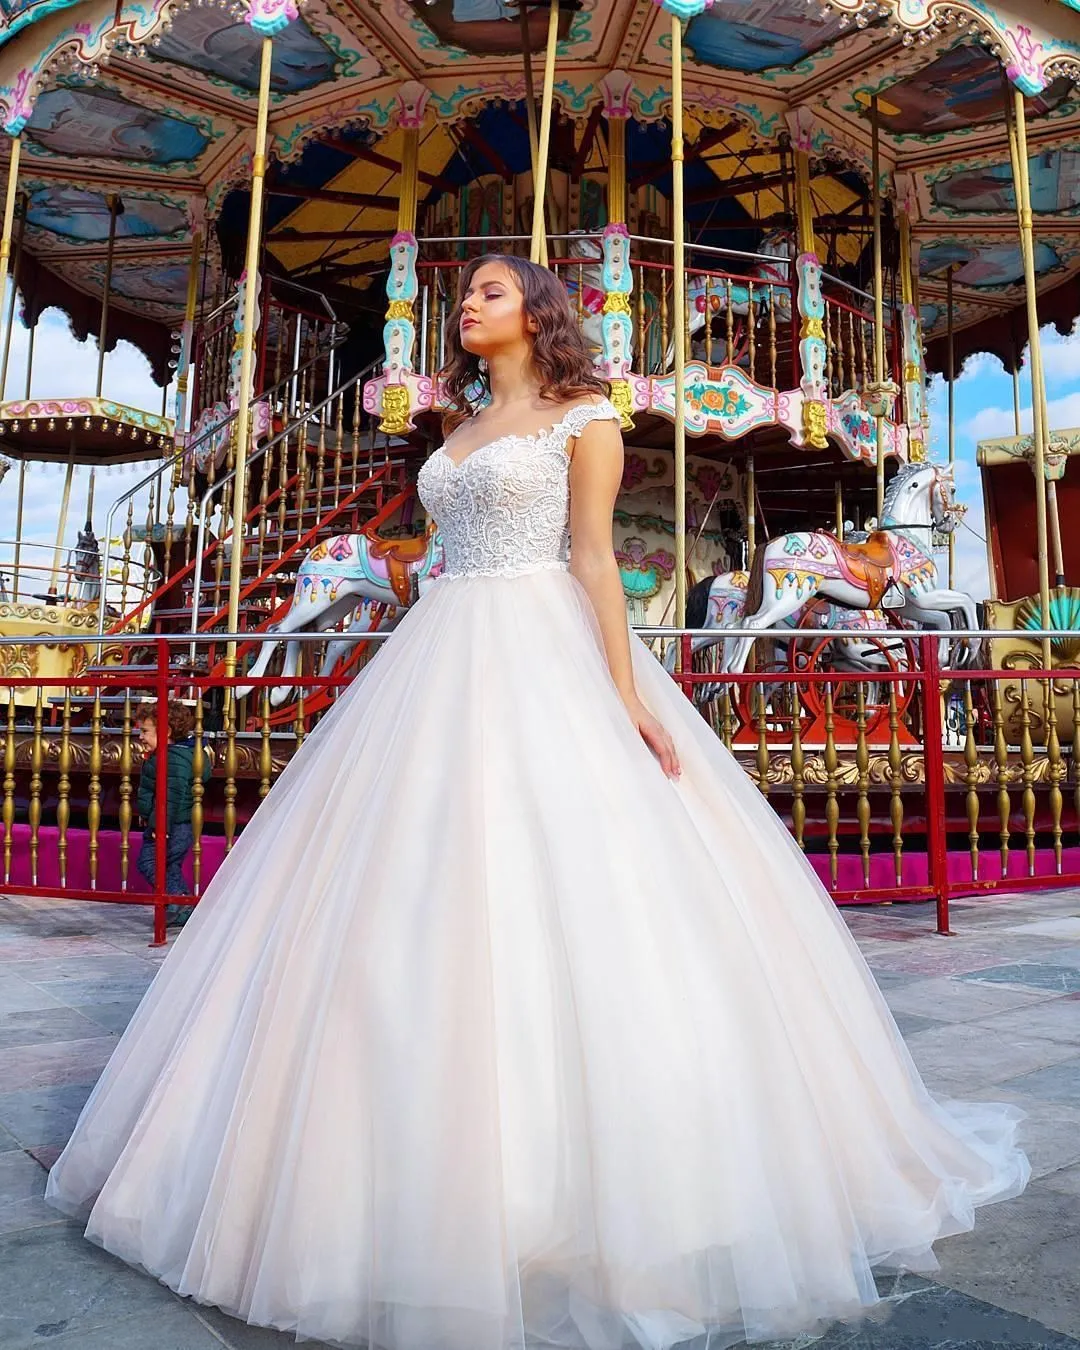 2019 Elegant Beach Wedding Dresses Capped Sleeves Lace Appliques A Line Tulle Bridal Gowns Cheap Wedding Gowns